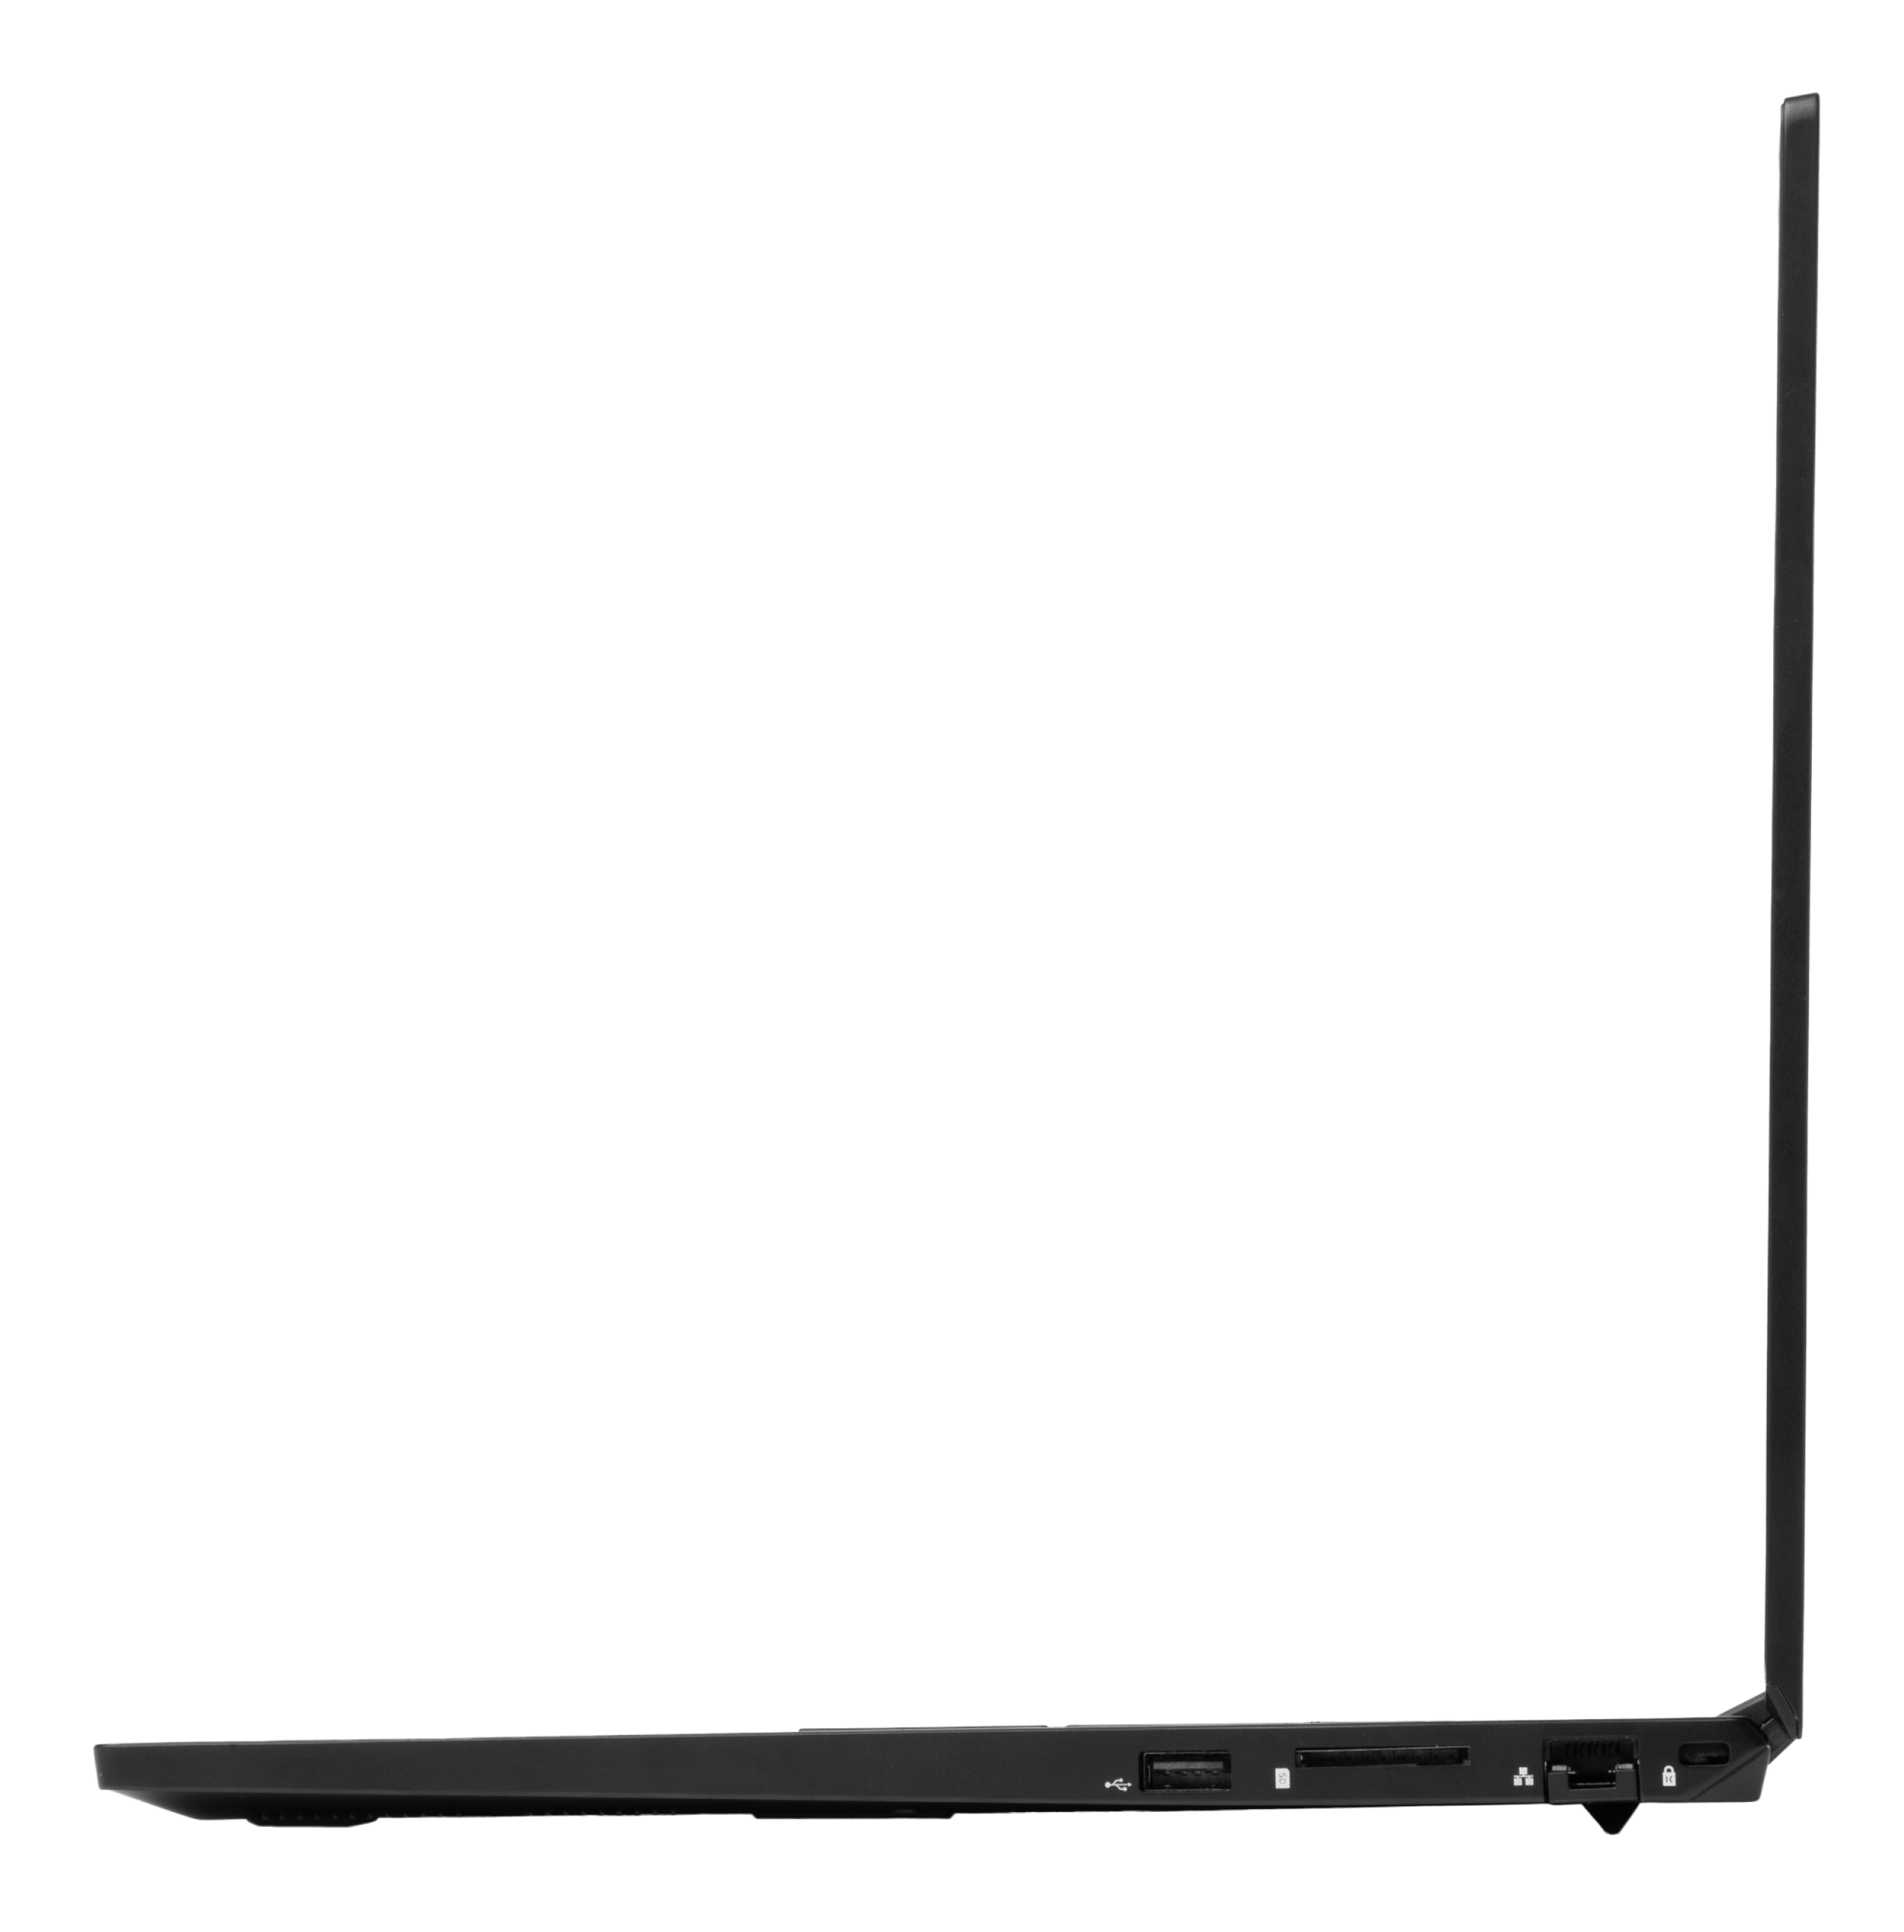 A right profile view of the Pangolin laptop’s ports, including charging port, HDMI, 2 x USB type A, 1 x USB type C, headphone/microphone combo jack, hardware camera kill switch.